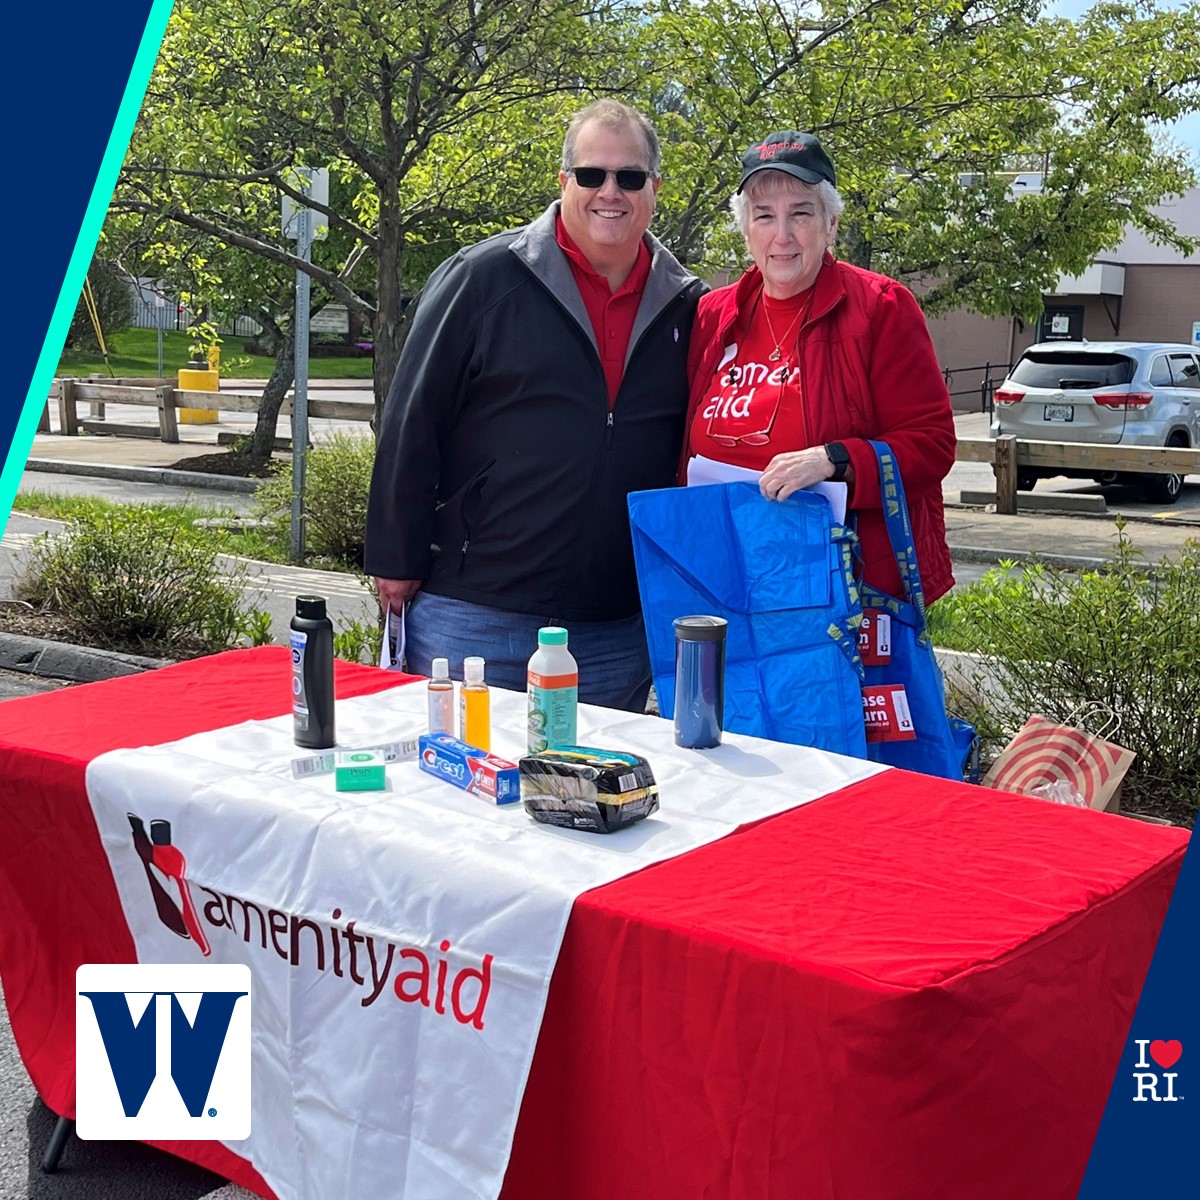 Thanks to everyone in the community for joining us at our Shred Day in Olneyville on Saturday! We had team members from our future Olneyville location, Lending Officers, our Hispanic/Latino & BIPOC Employee Resource Groups, and more! _ What we value is you.™ #WashTrust